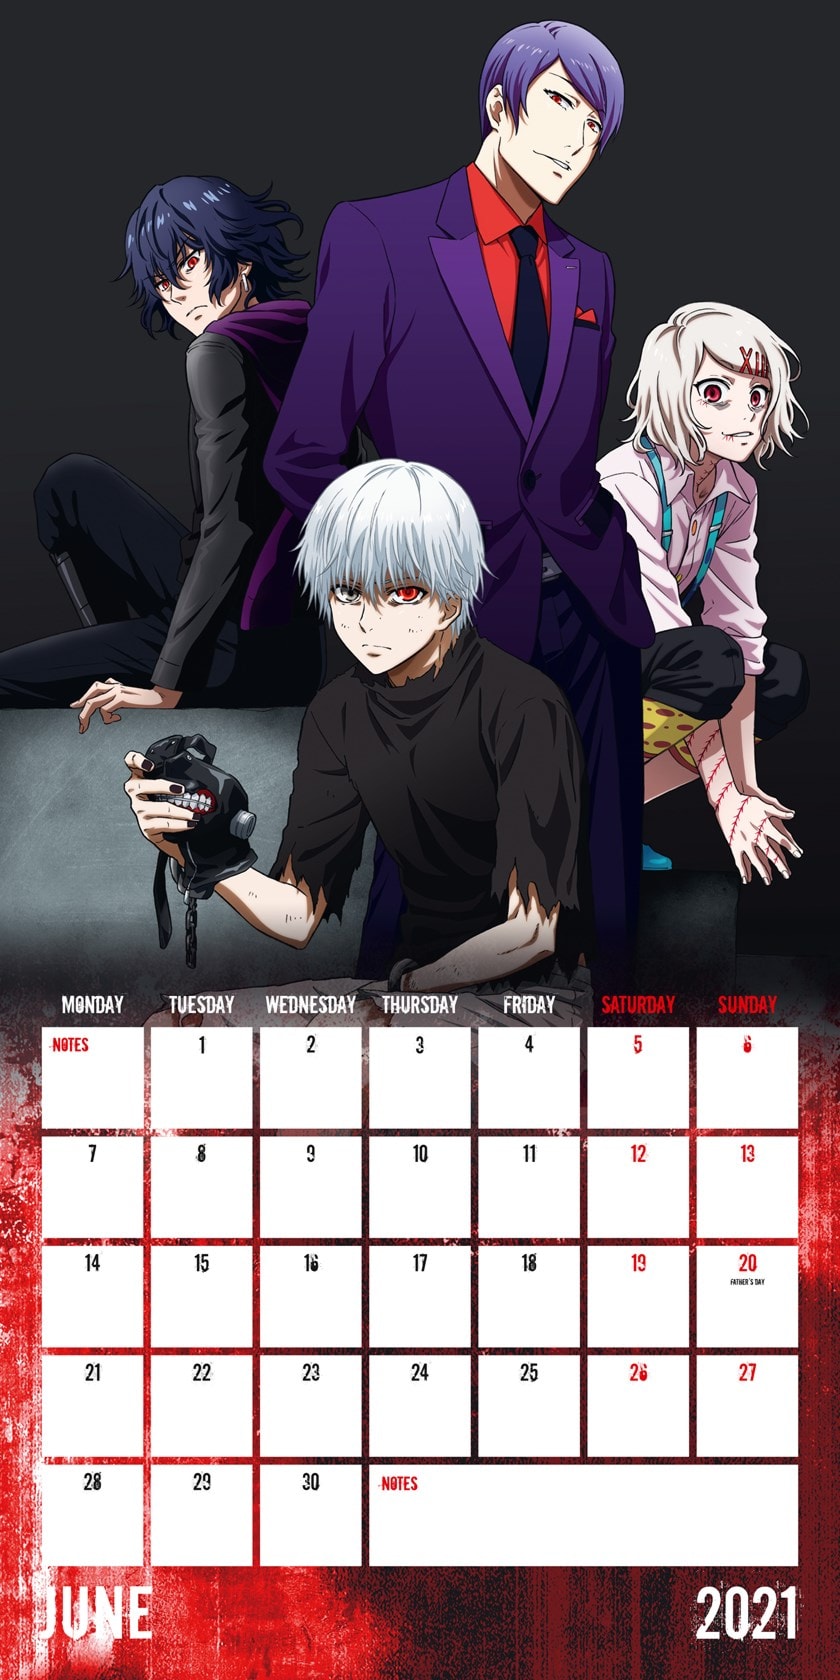 Tokyo Ghoul: Square 2021 Calendar | Calendars | Free shipping over £20